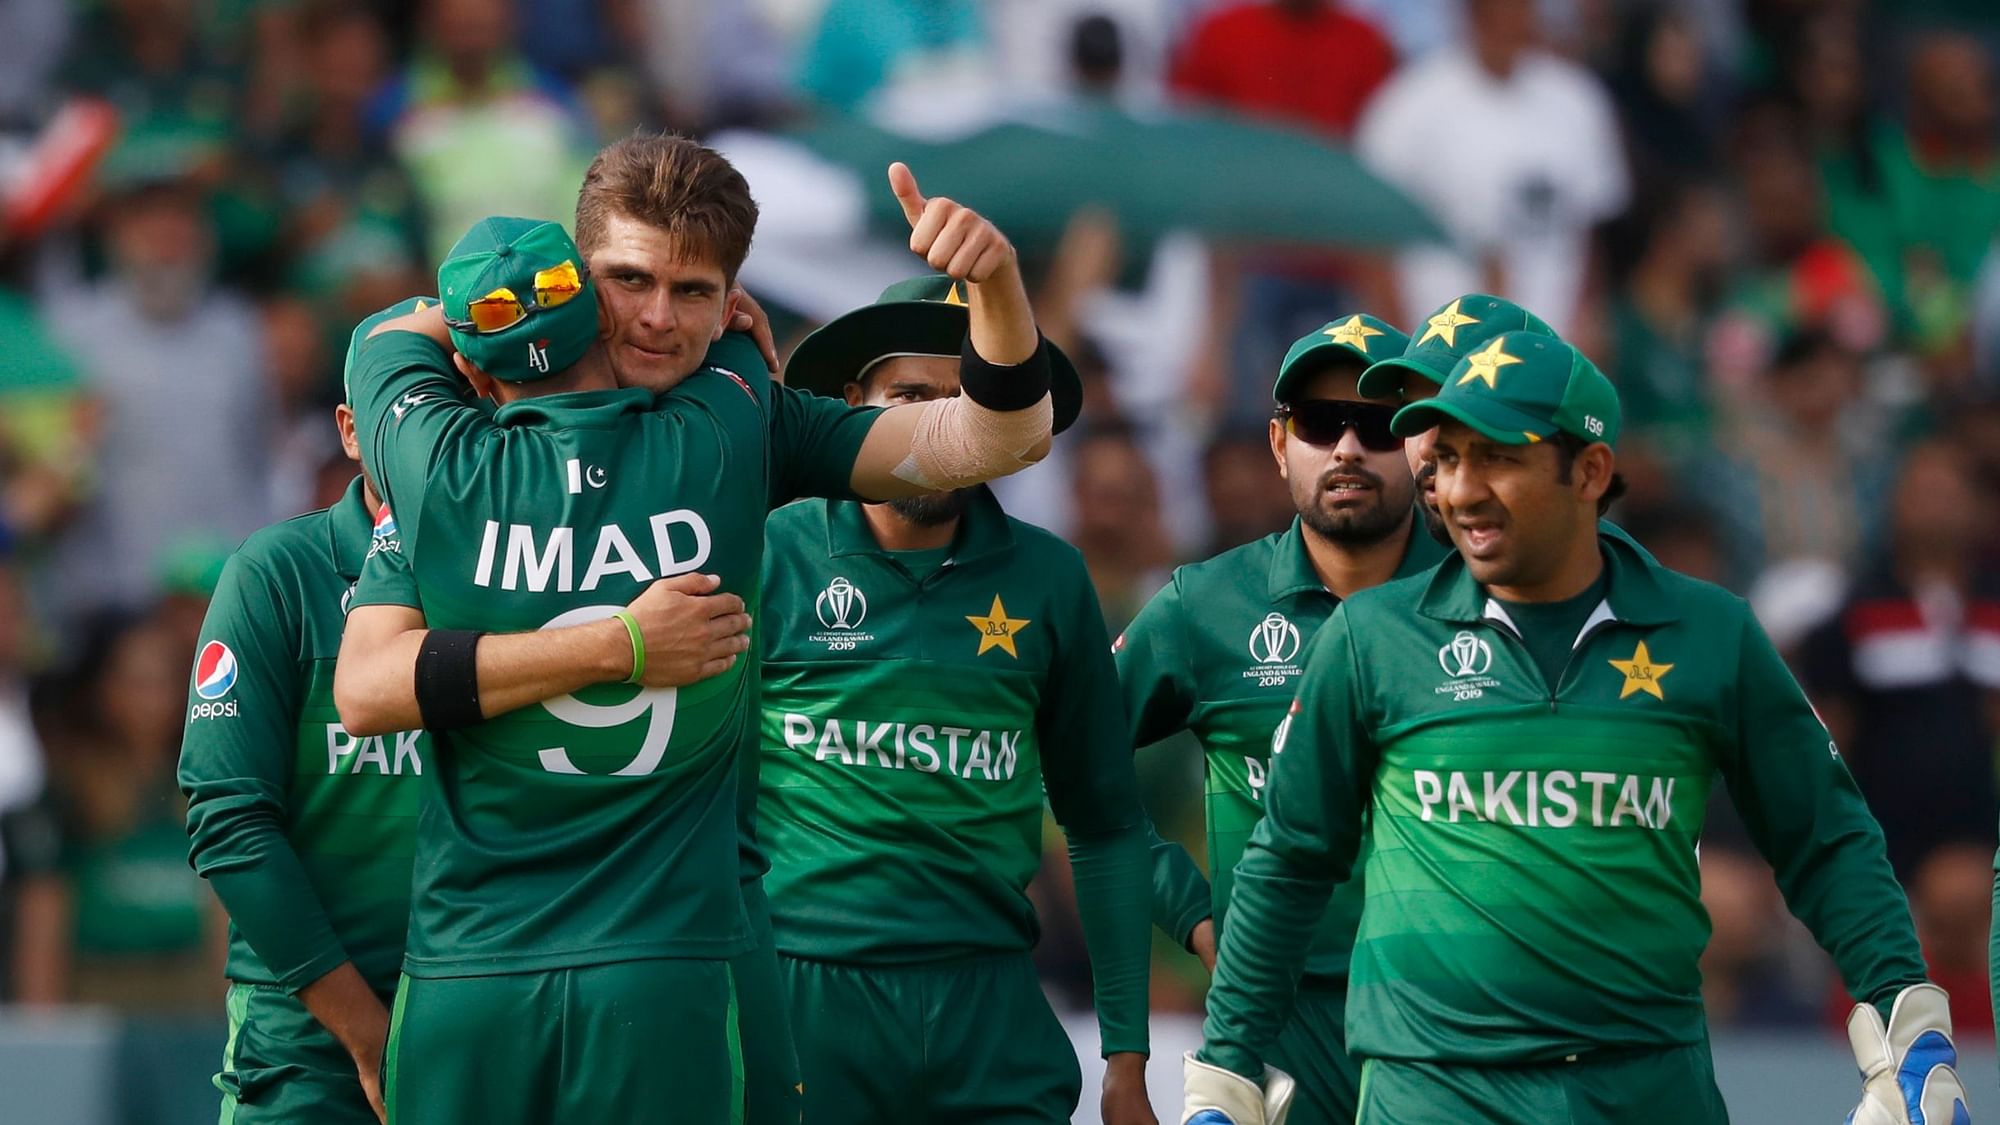 Shaheen Afridi became the youngest bowler to claim a five-wicket haul in the World Cup.